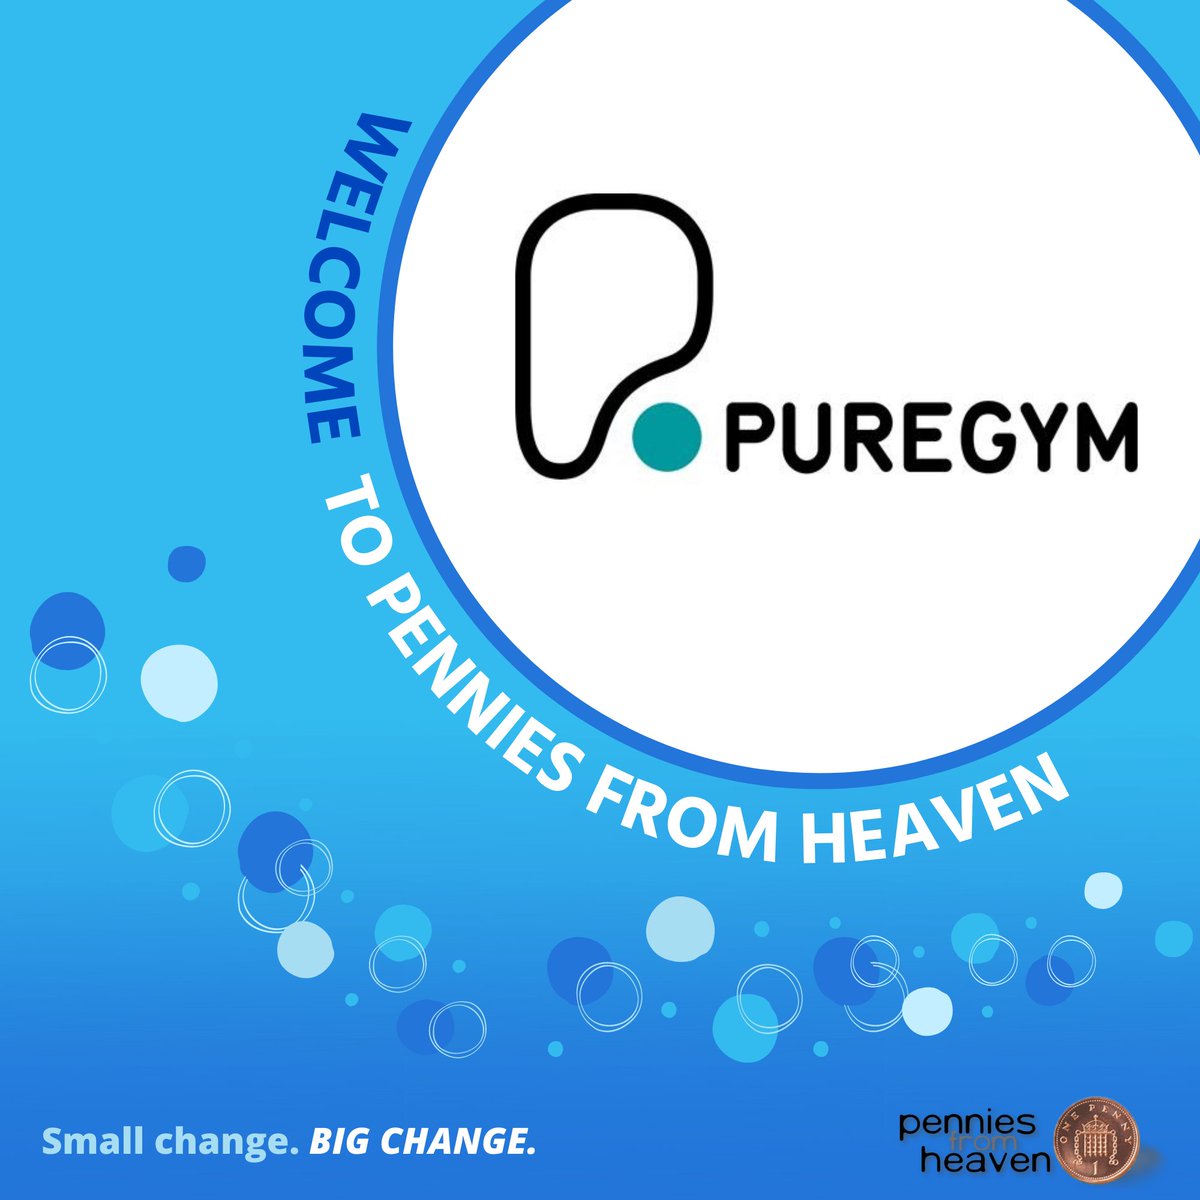 We are very proud to welcome @PureGym to the Pennies from Heaven family. Supporting @TheBHF employees at PureGym now have the opportunity to donate the pennies from their pay each month towards this wonderful charity. #Welcome #PenniesfromHeaven #GivingPennies #Fundraising